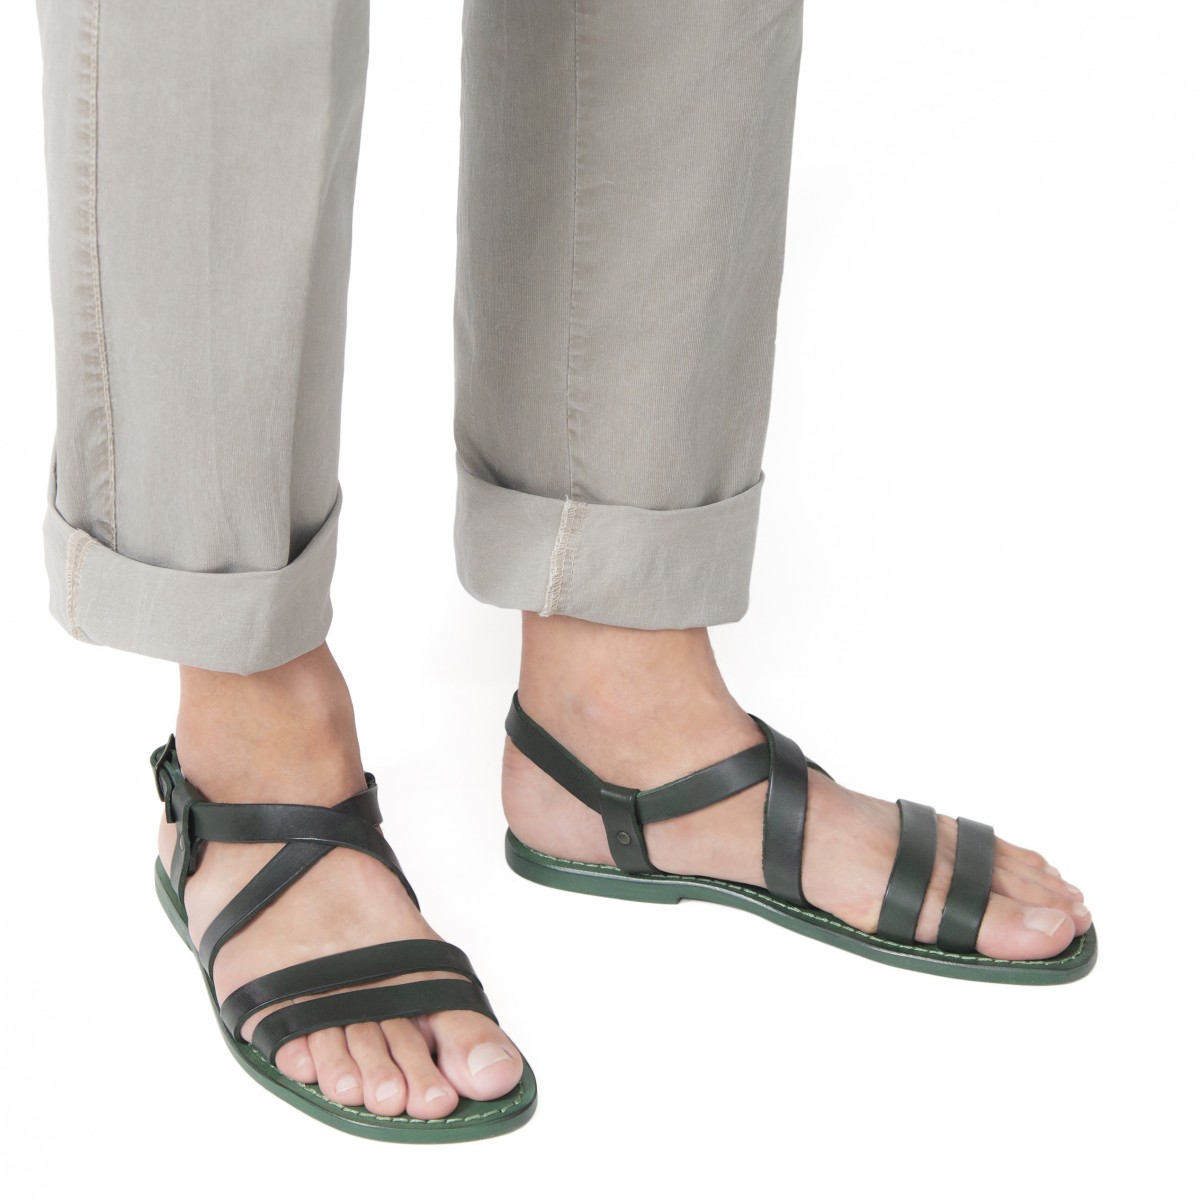 Men's green leather sandals Handmade in Italy | The leather craftsmen